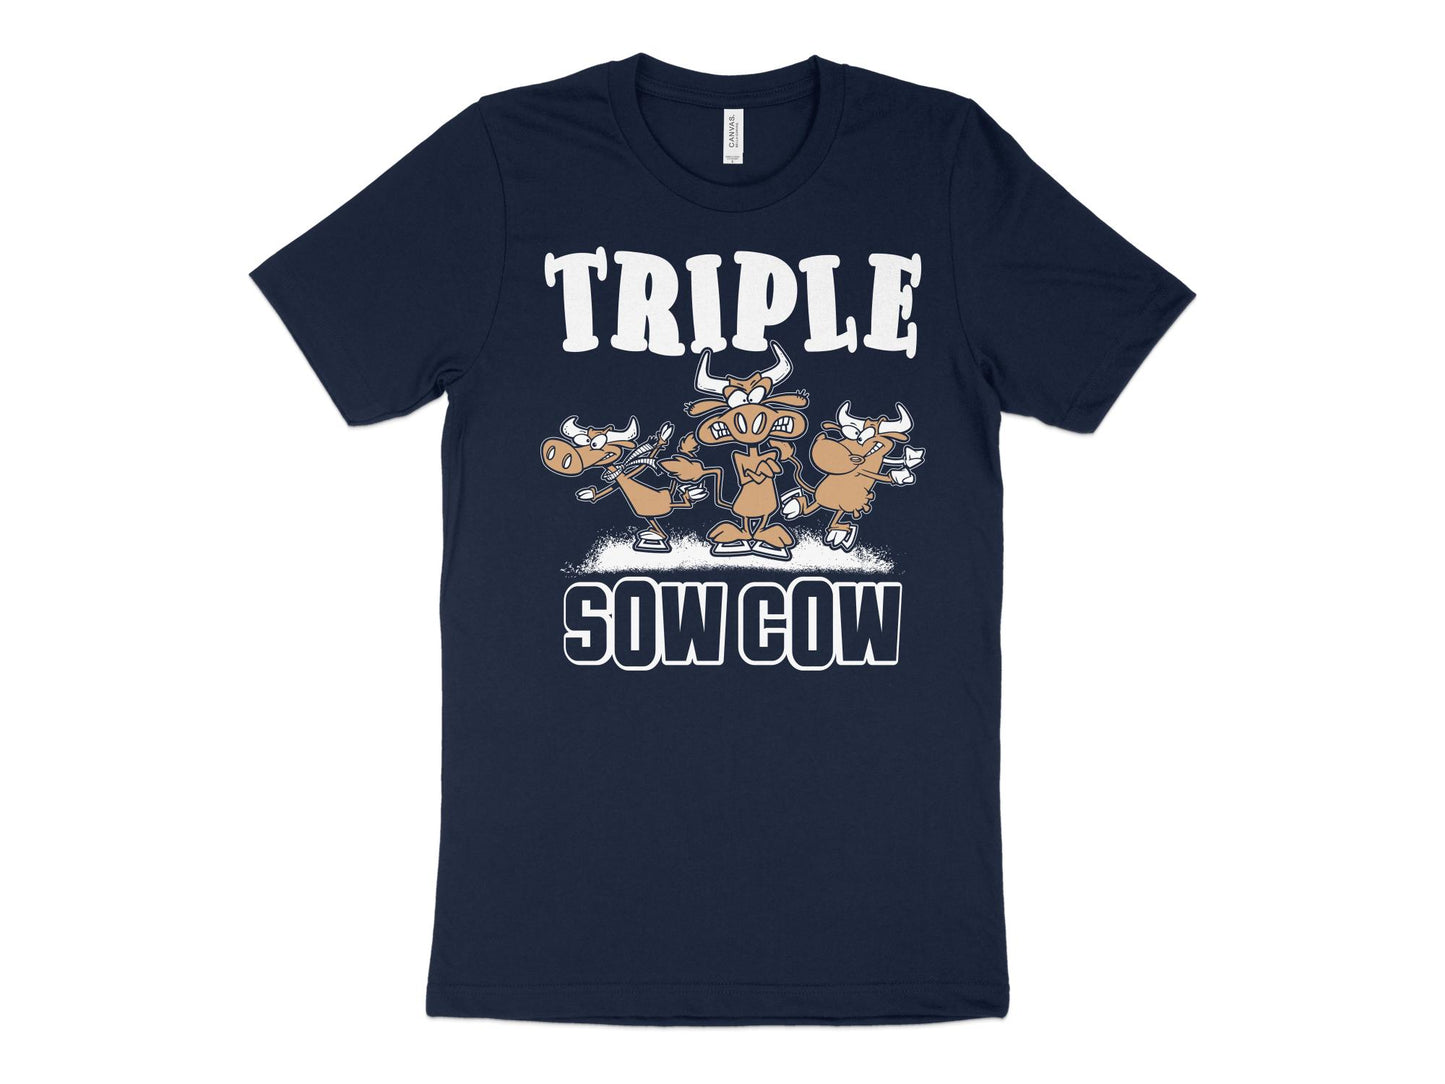 Figure Skating Shirt - Triple Sow Cow, navy blue